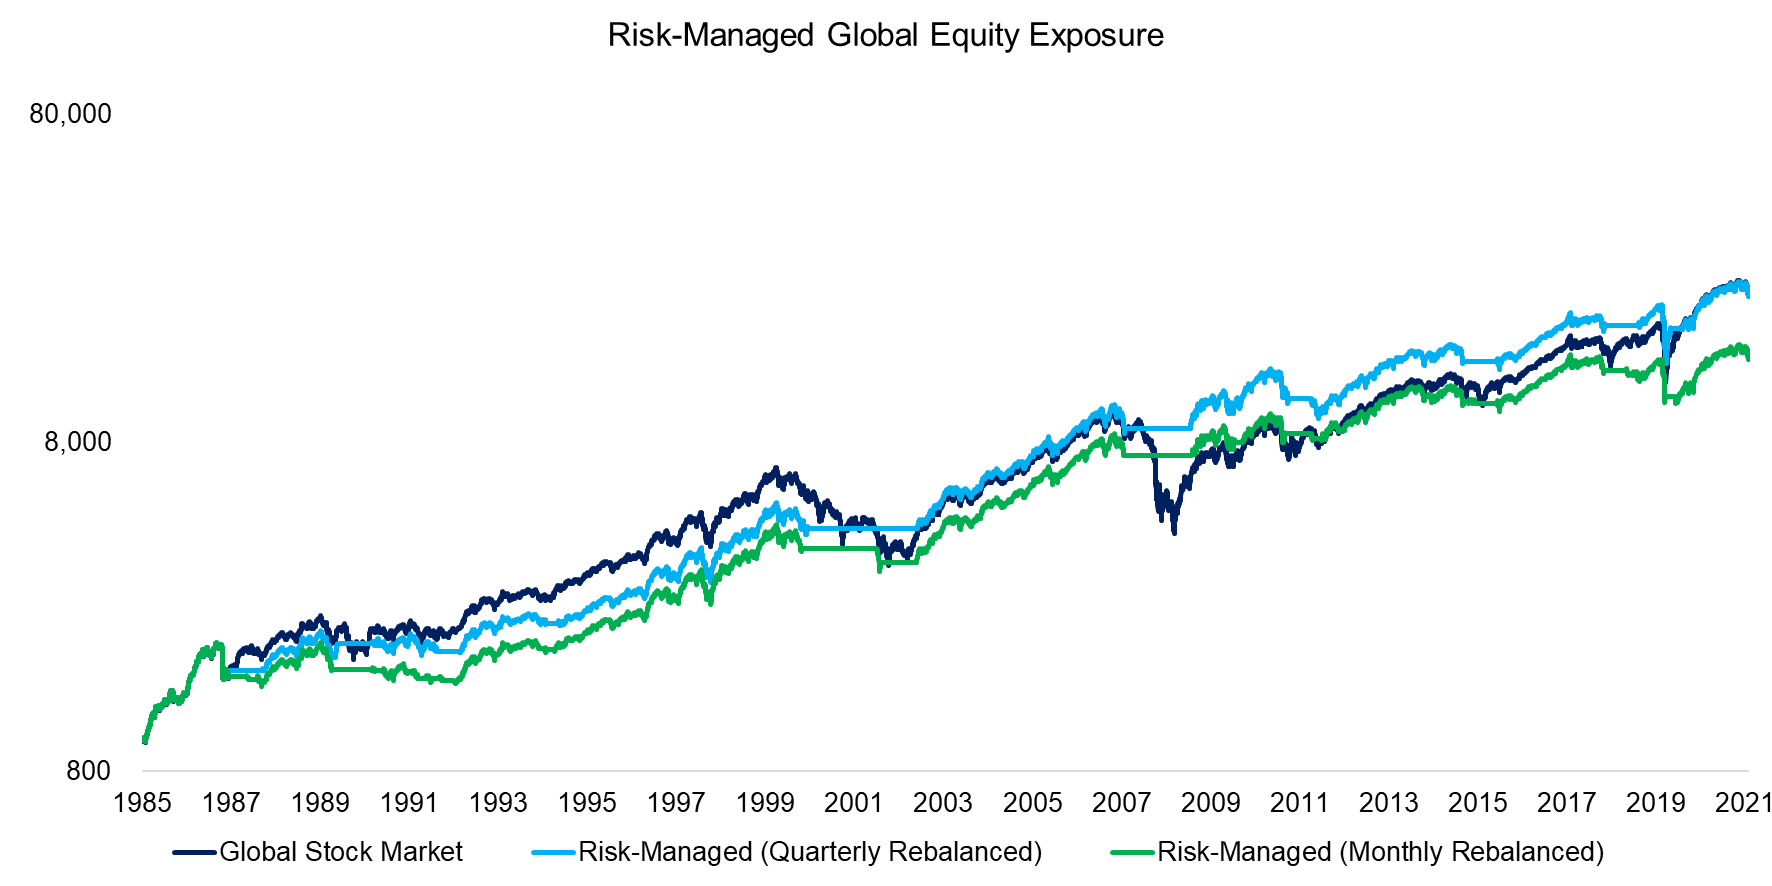 Risk-Managed Global Equity Exposure